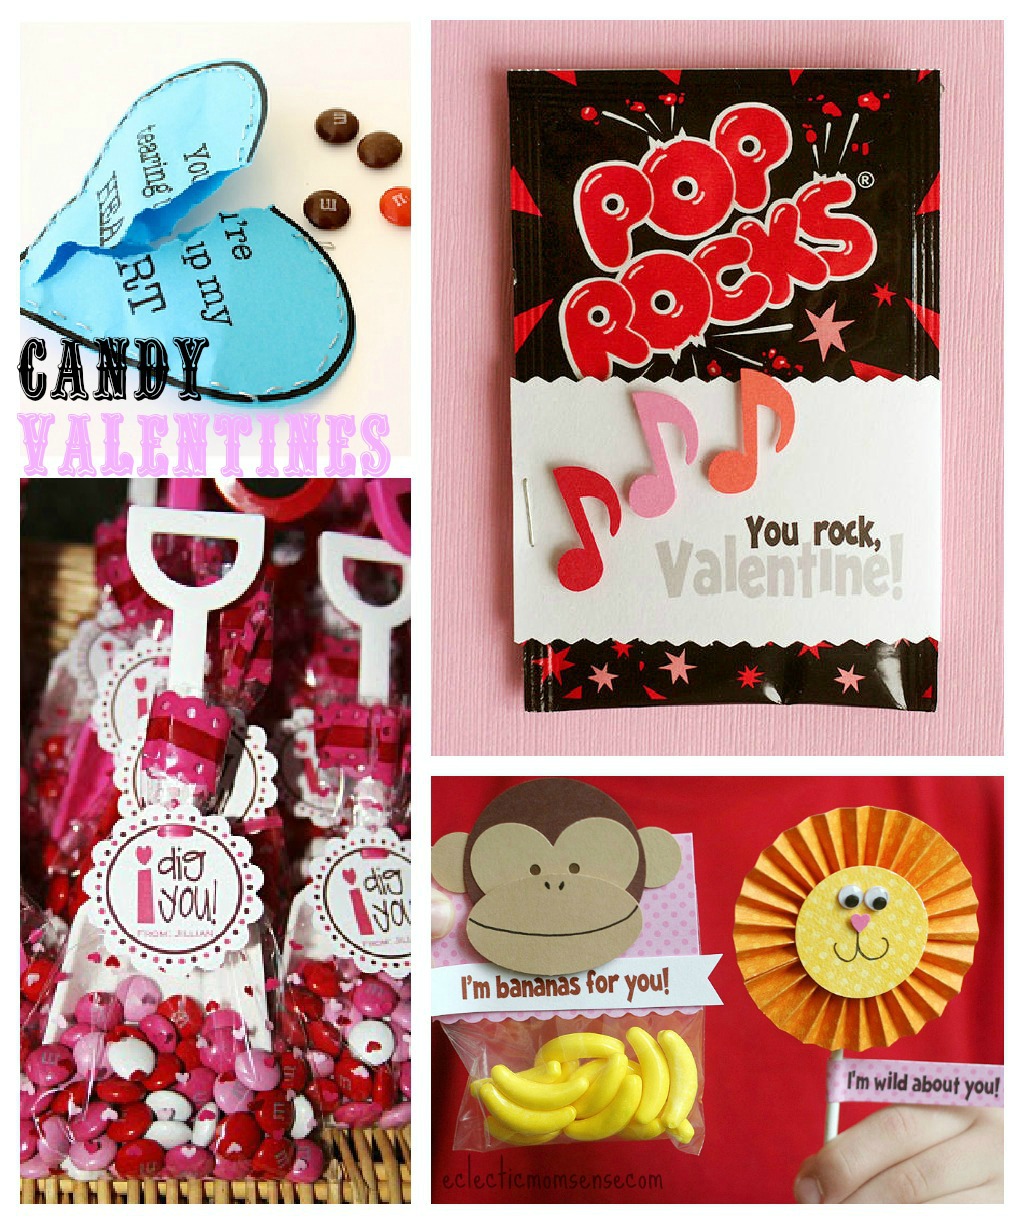 Candy Valentines Ideas via @eclecticmommy - eclecticmomsense.com